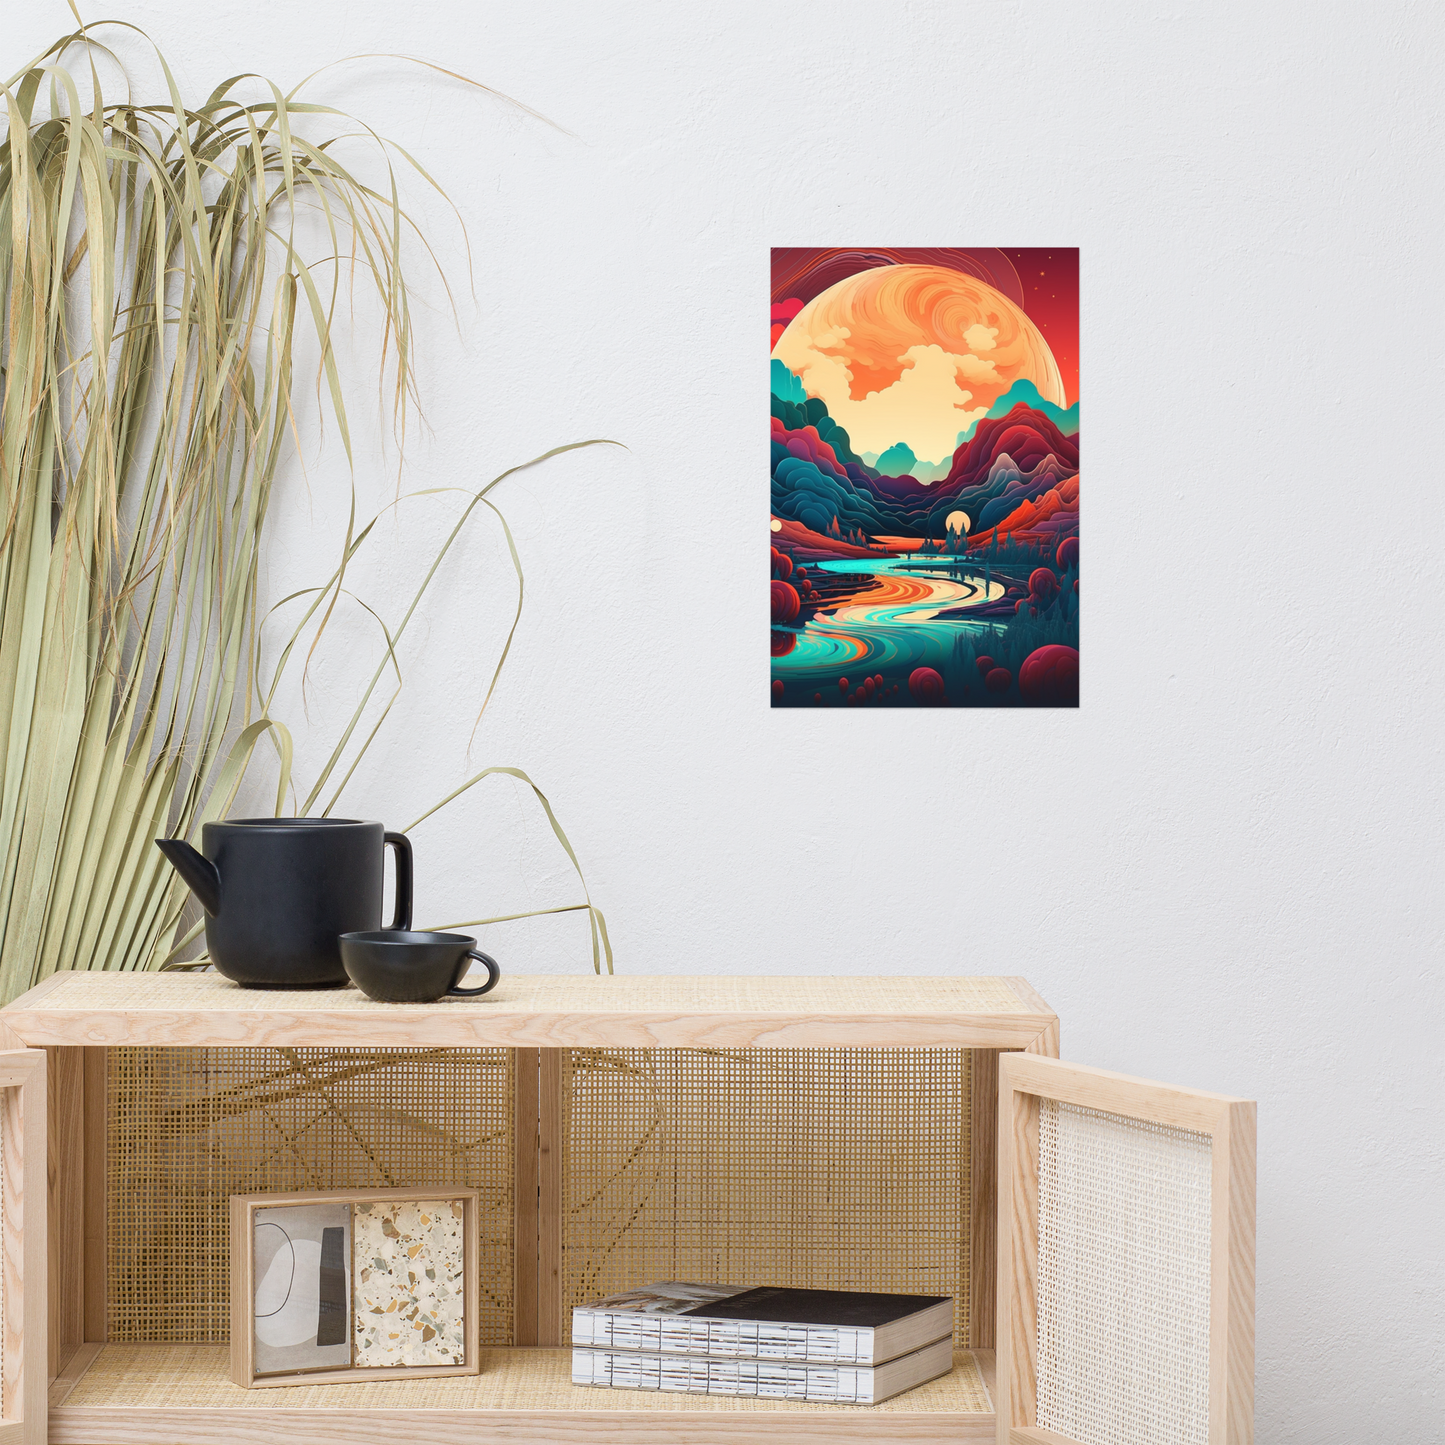 Stunning Extraterrestrial Landscape Poster Art: Fiery Sunset Between Two Mountain Ranges